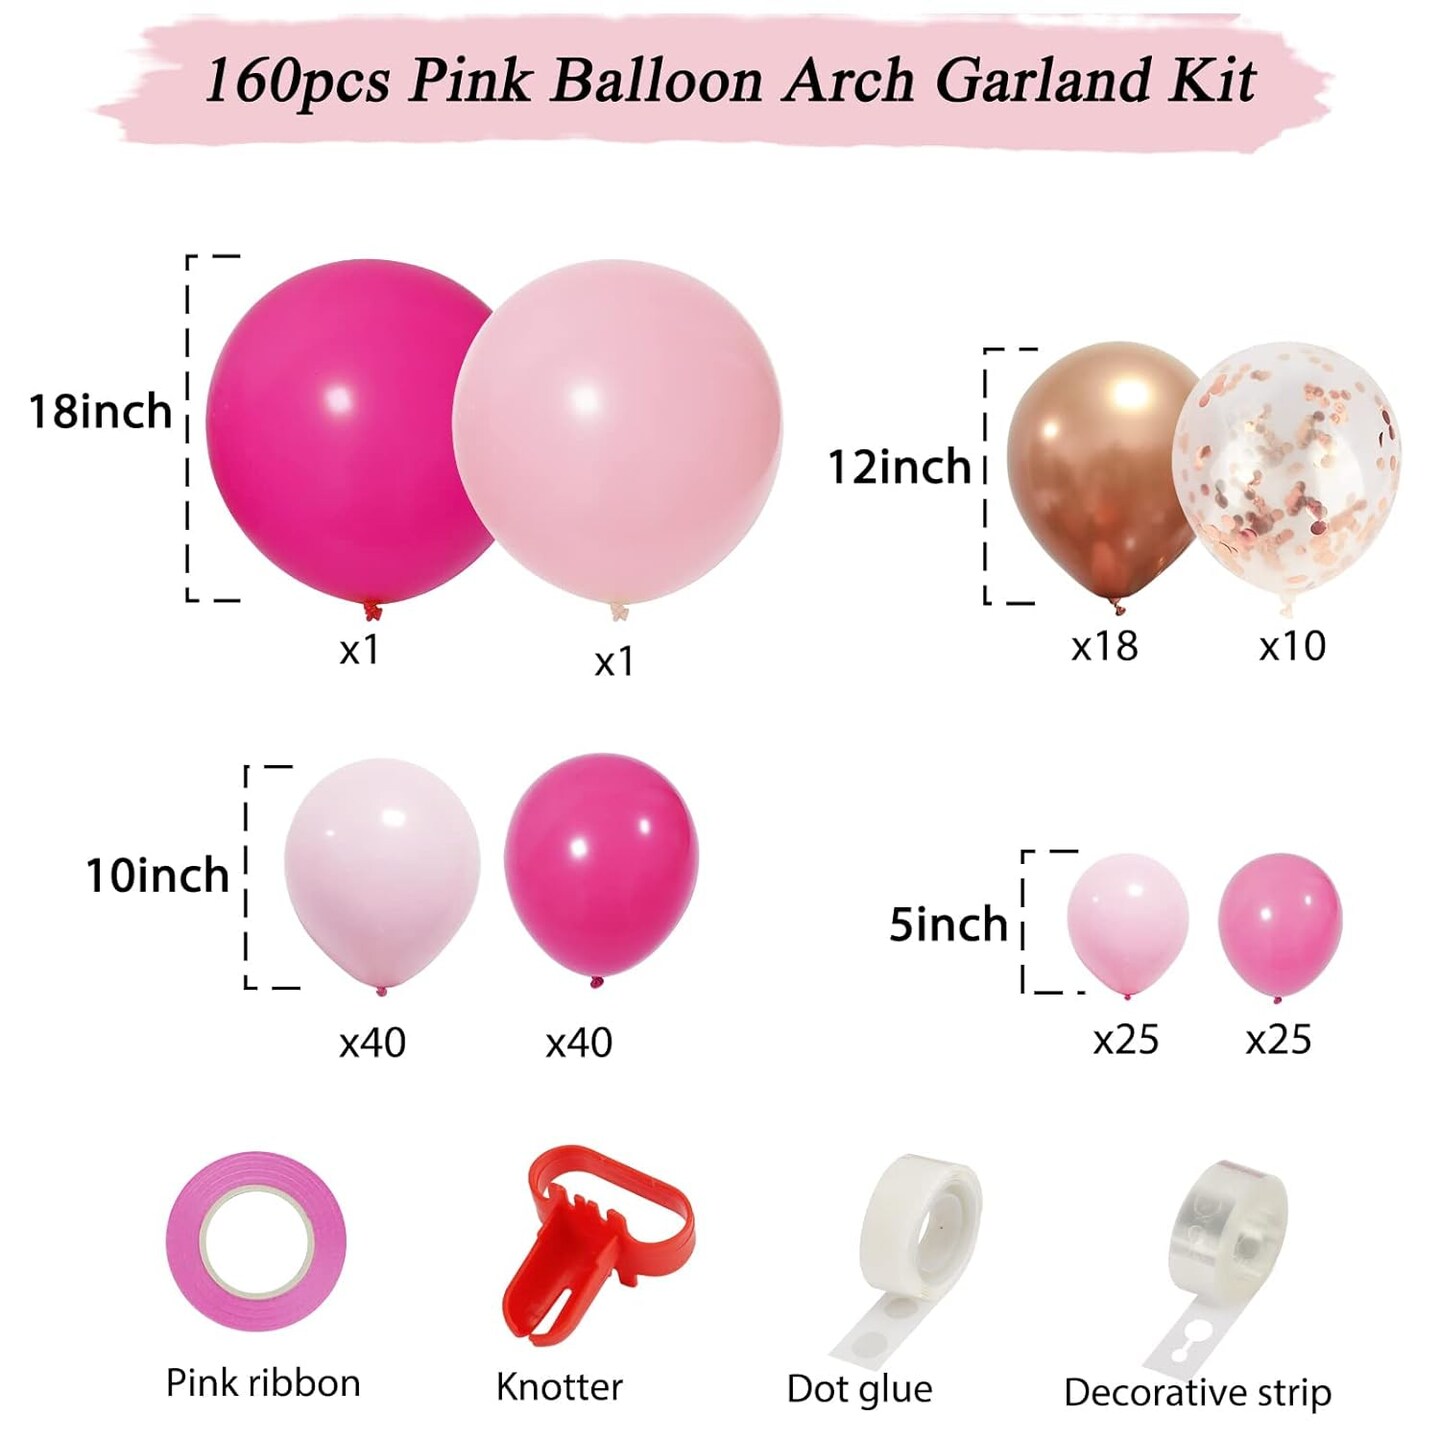 160pcs Pink Balloon Arch Garland Kit, Hot Pink Rose Gold Metallic Confetti Balloons for Birthday Baby Shower Princess Theme Party Wedding Background Decorations